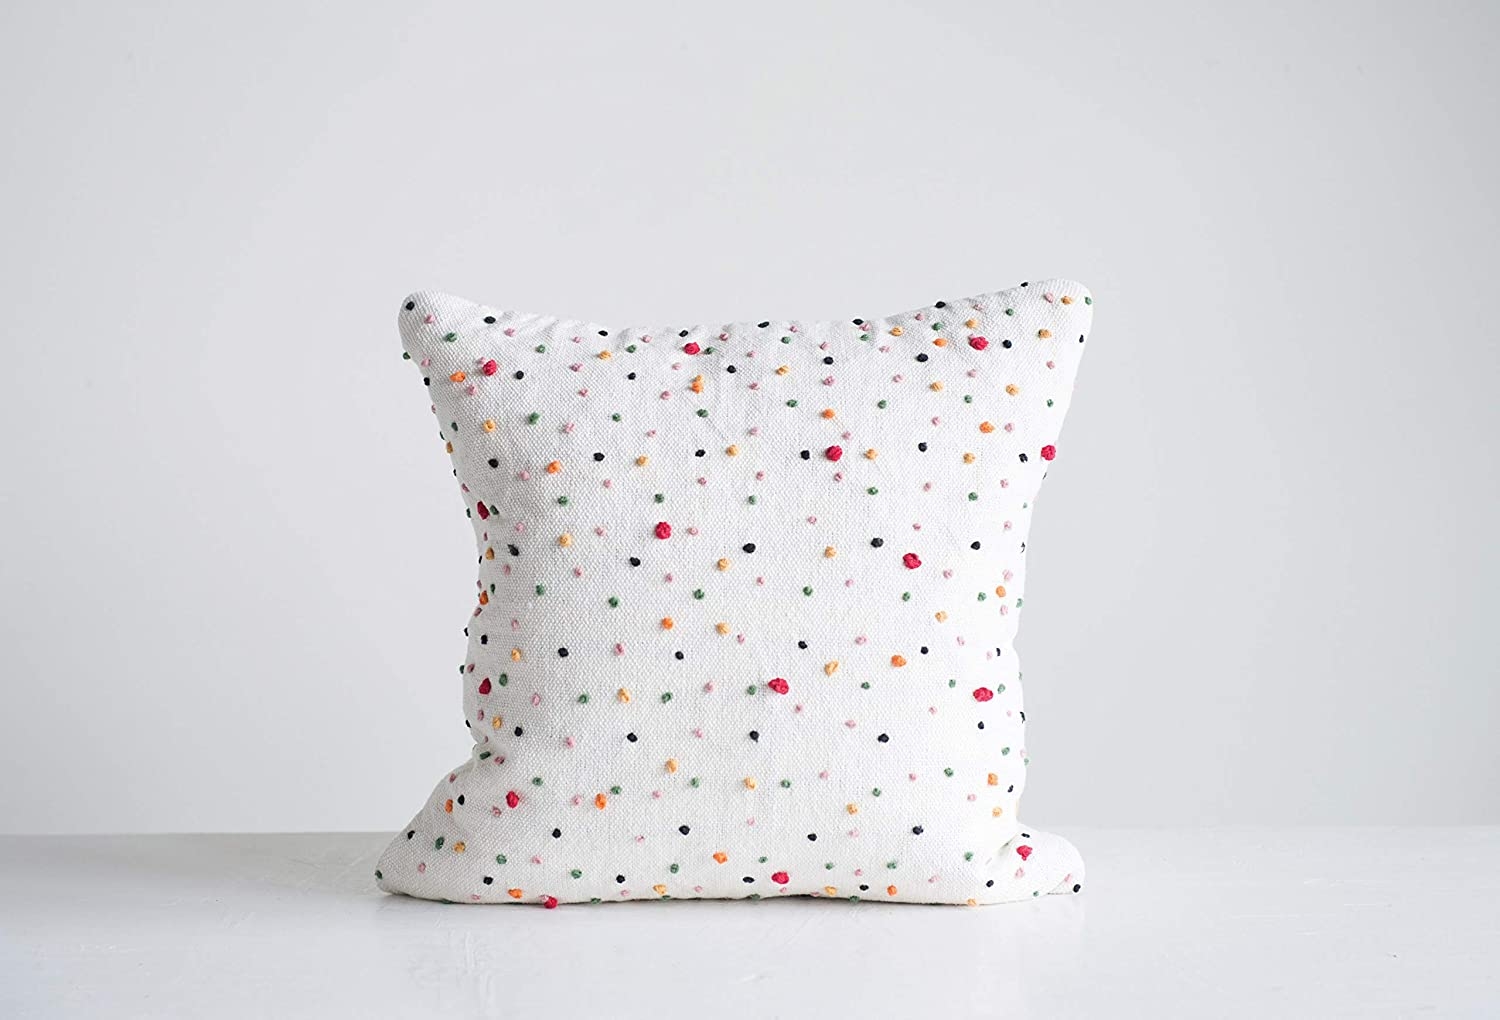 Square White Cotton Pillow with Multicolor Polka Dots & French Knots - Image 2